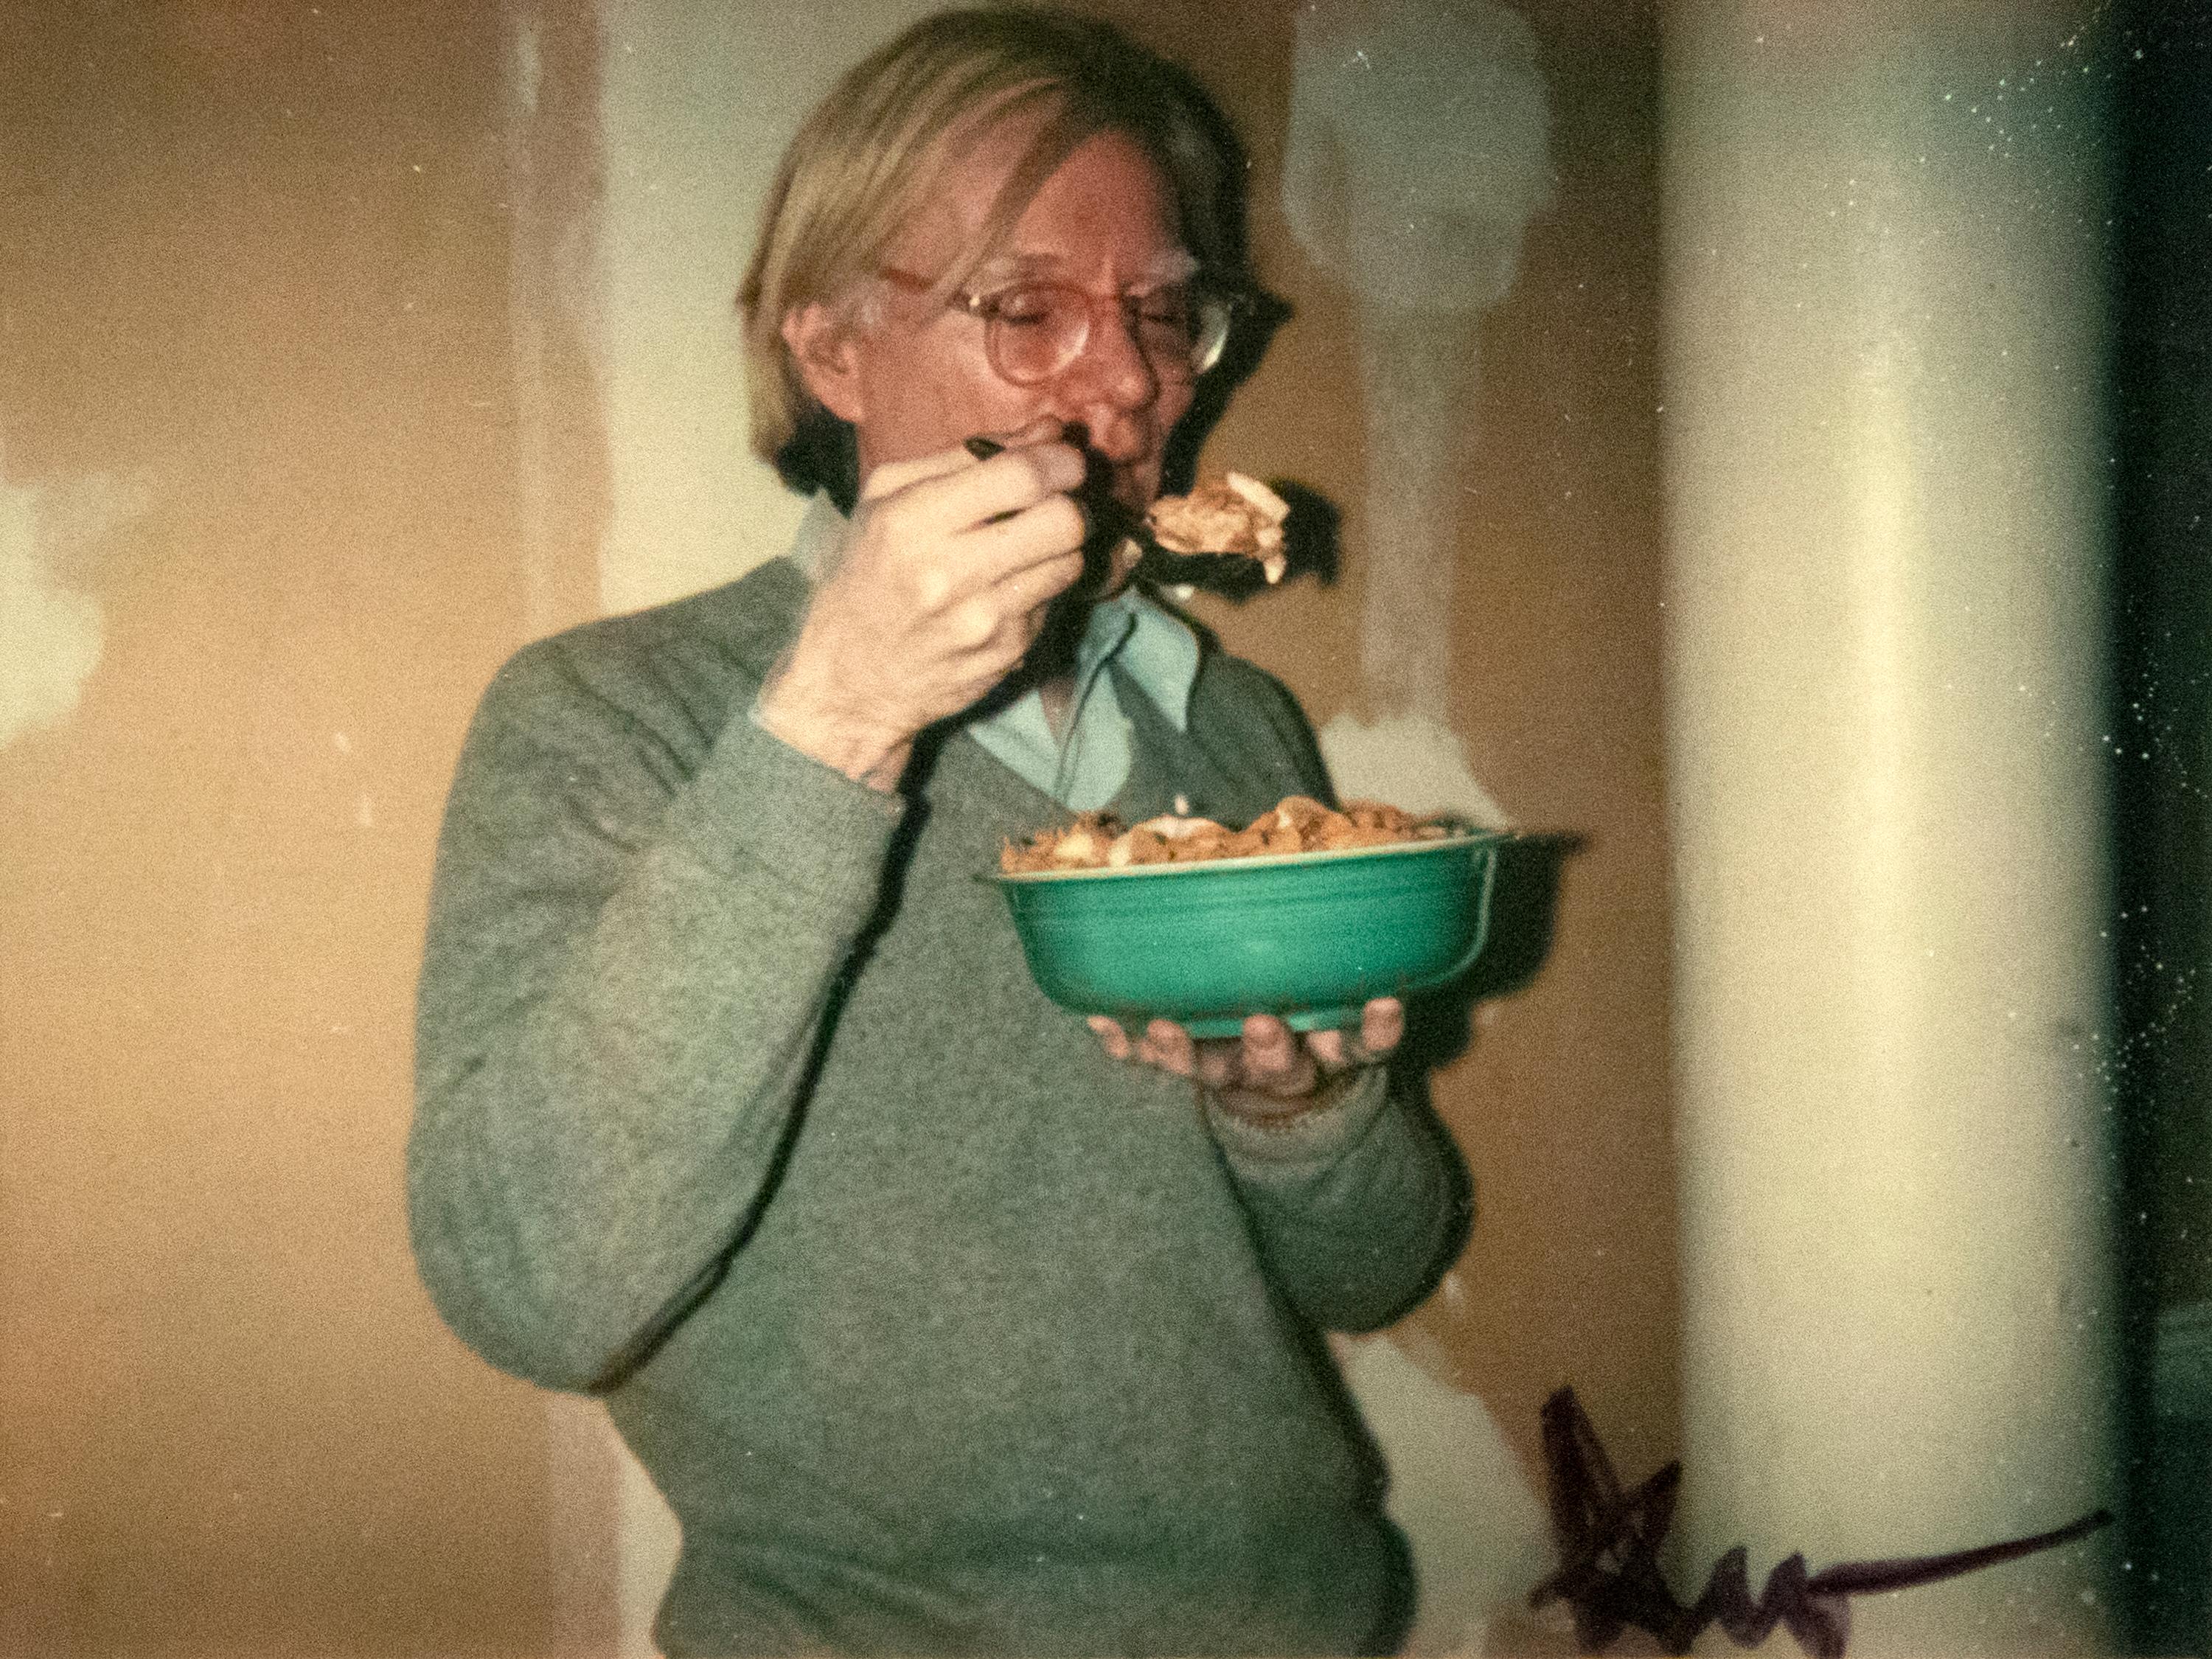 Andy Warhol Portrait Photograph - Warhol with Corn Flakes